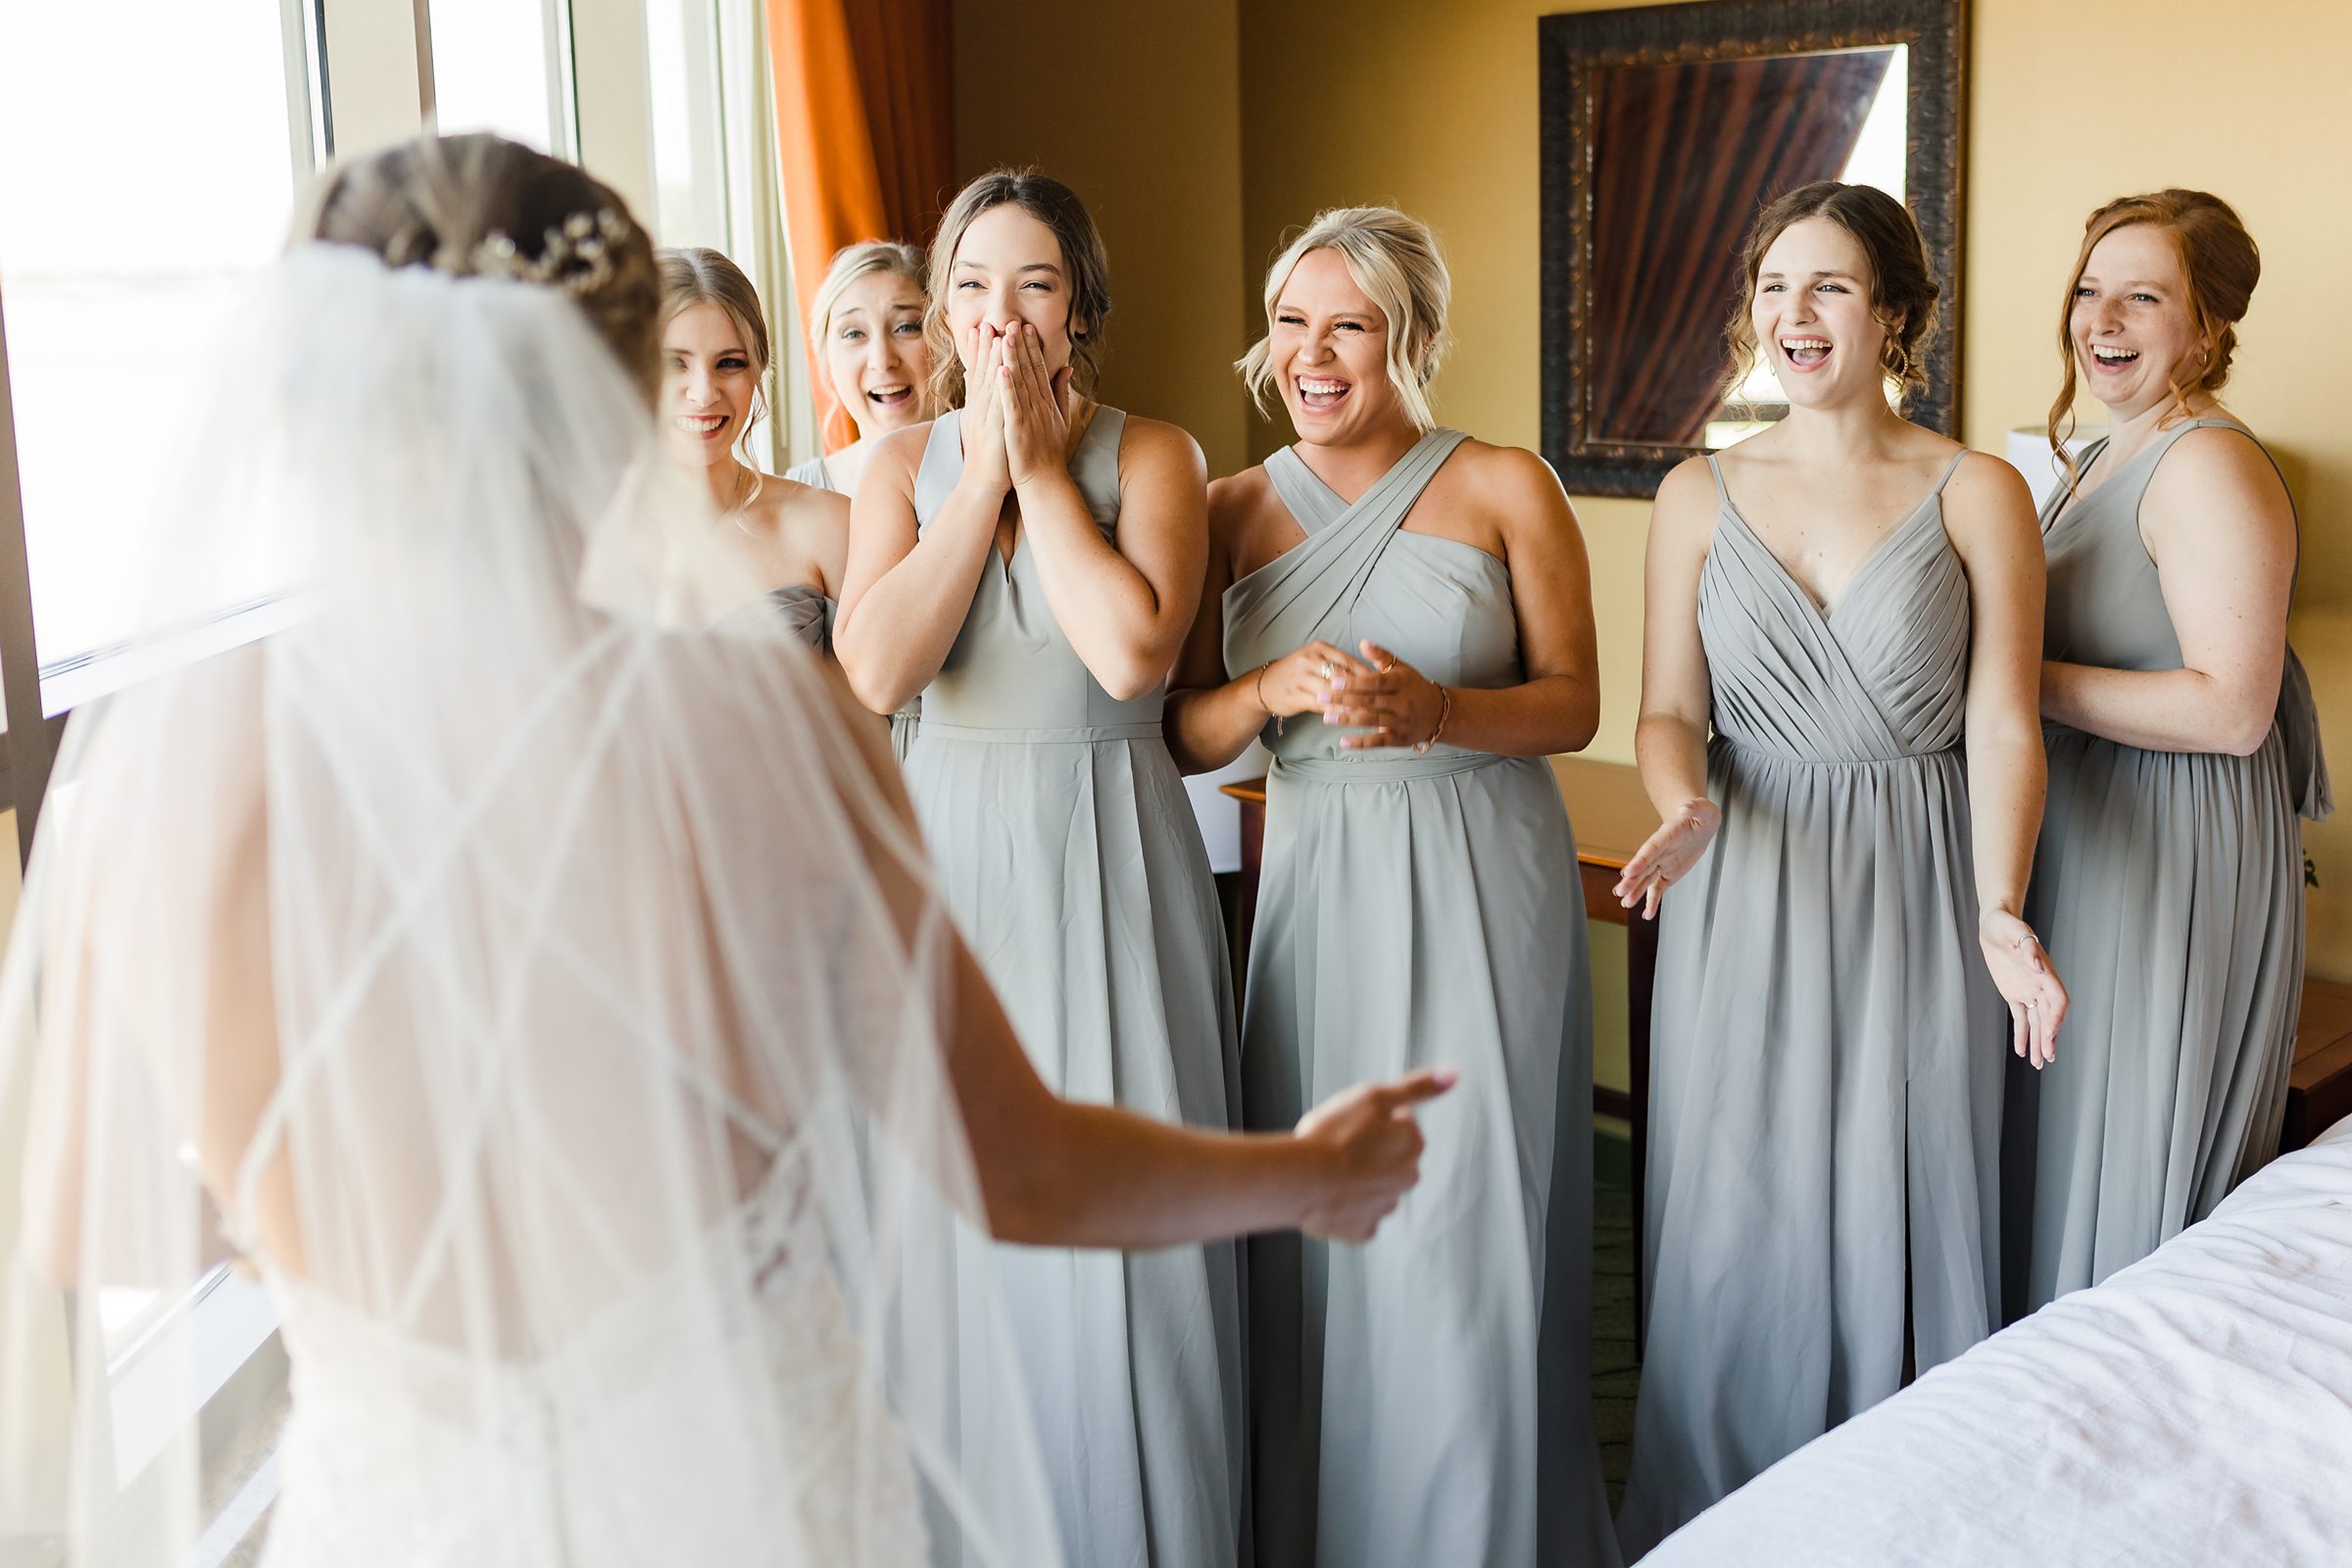 Bride shares a first look with her bridesmaids before her wedding at the Luthy Botanical Garden in Peoria, Illinois